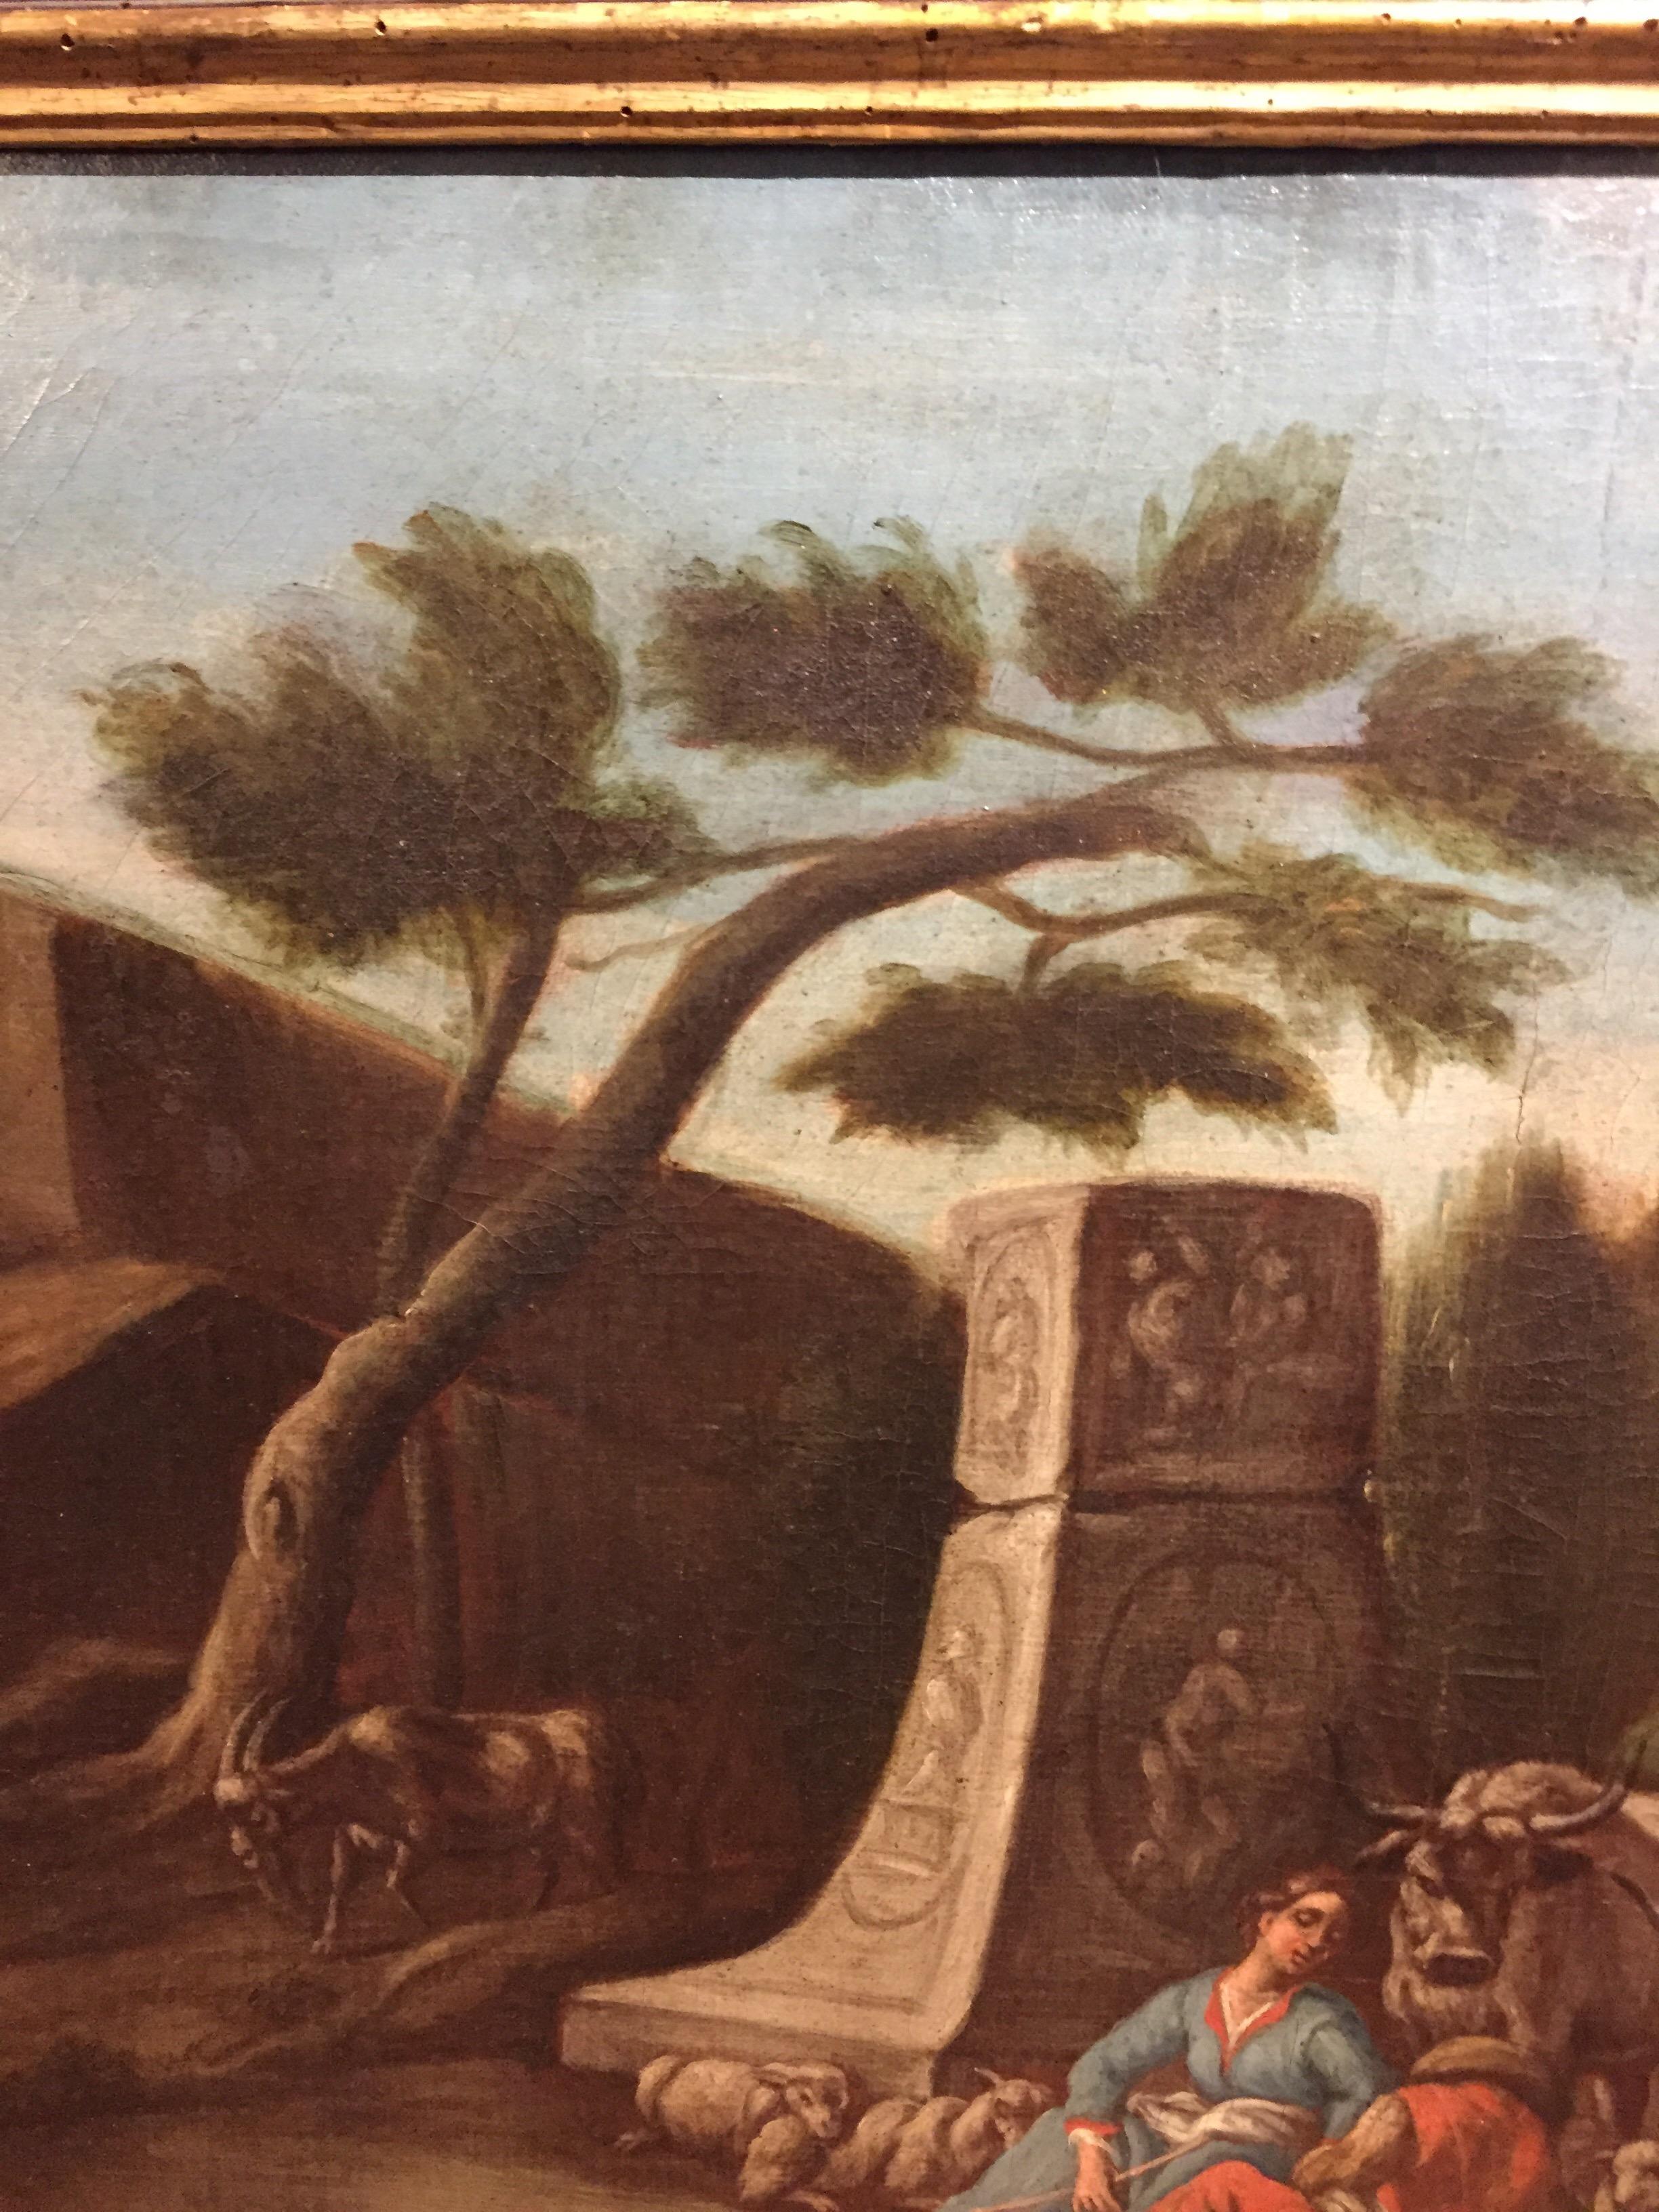 Italian 18th Century Neoclassical Bucolic Landscape with Ruins Figures Herds 8